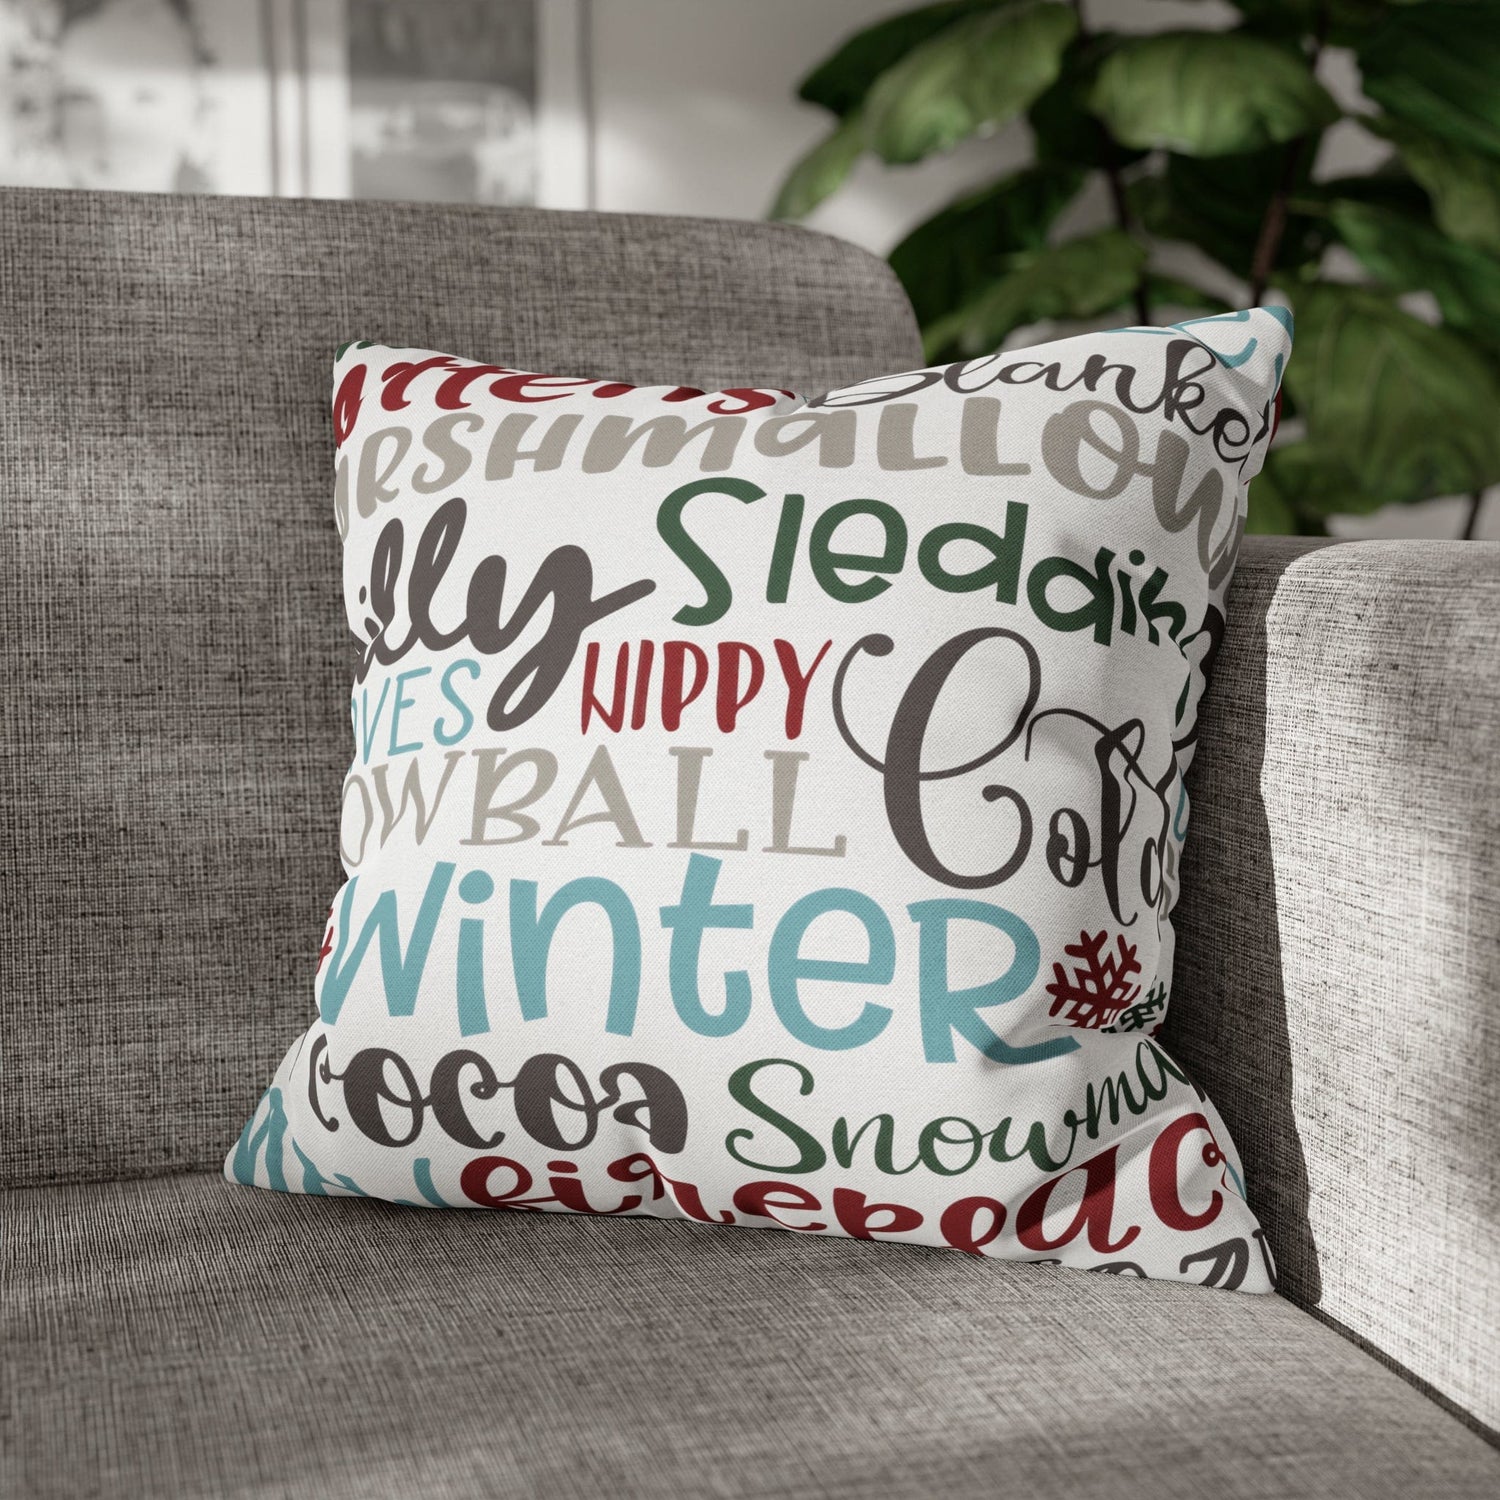 Kate McEnroe New York Christmas Throw Pillow Cover, Mittens, Mashmallows, Snowballs, Sledding, Chilly Winter Word Art Cushion Covers, Farmhouse DecorThrow Pillow Covers20686719628418103317